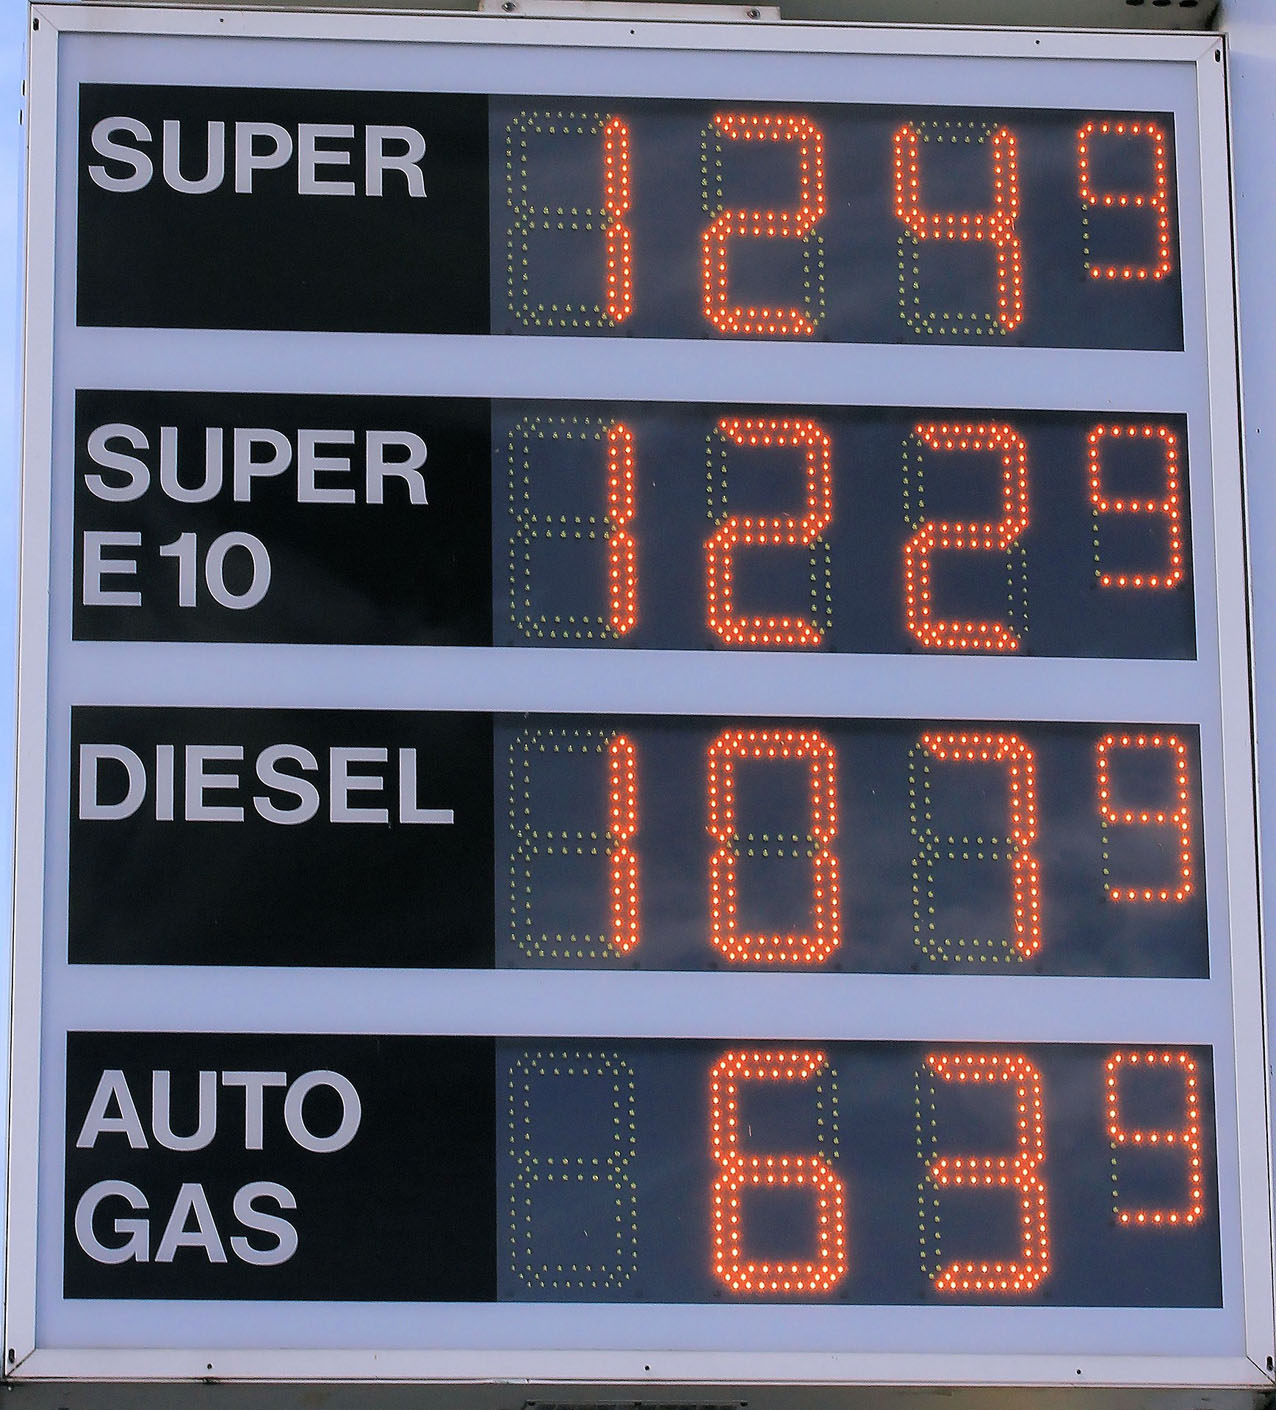 Fuel prices on a petrol station scoreboard